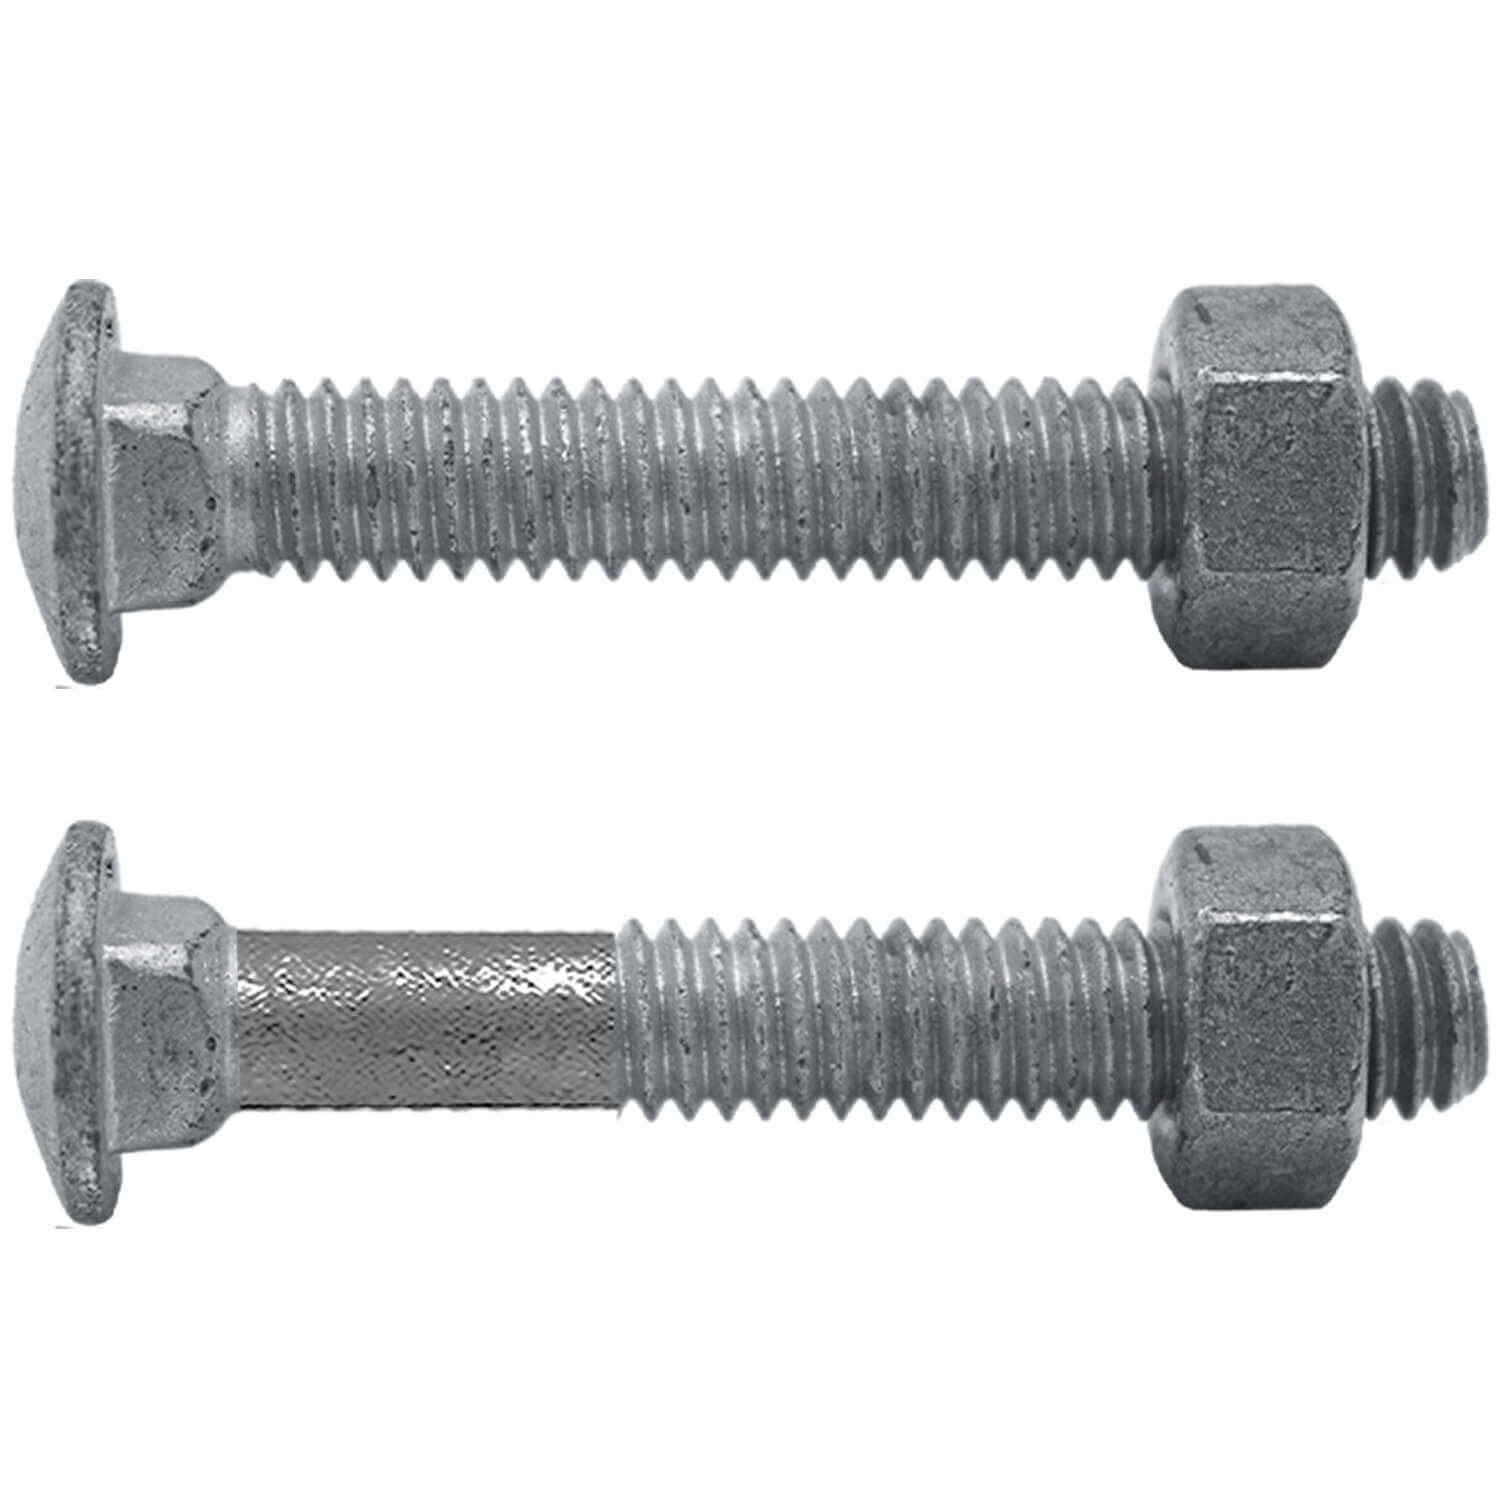 5/16-18 x 4" Carriage Bolts and Nuts Hot Dip Galvanized Quantity 250 